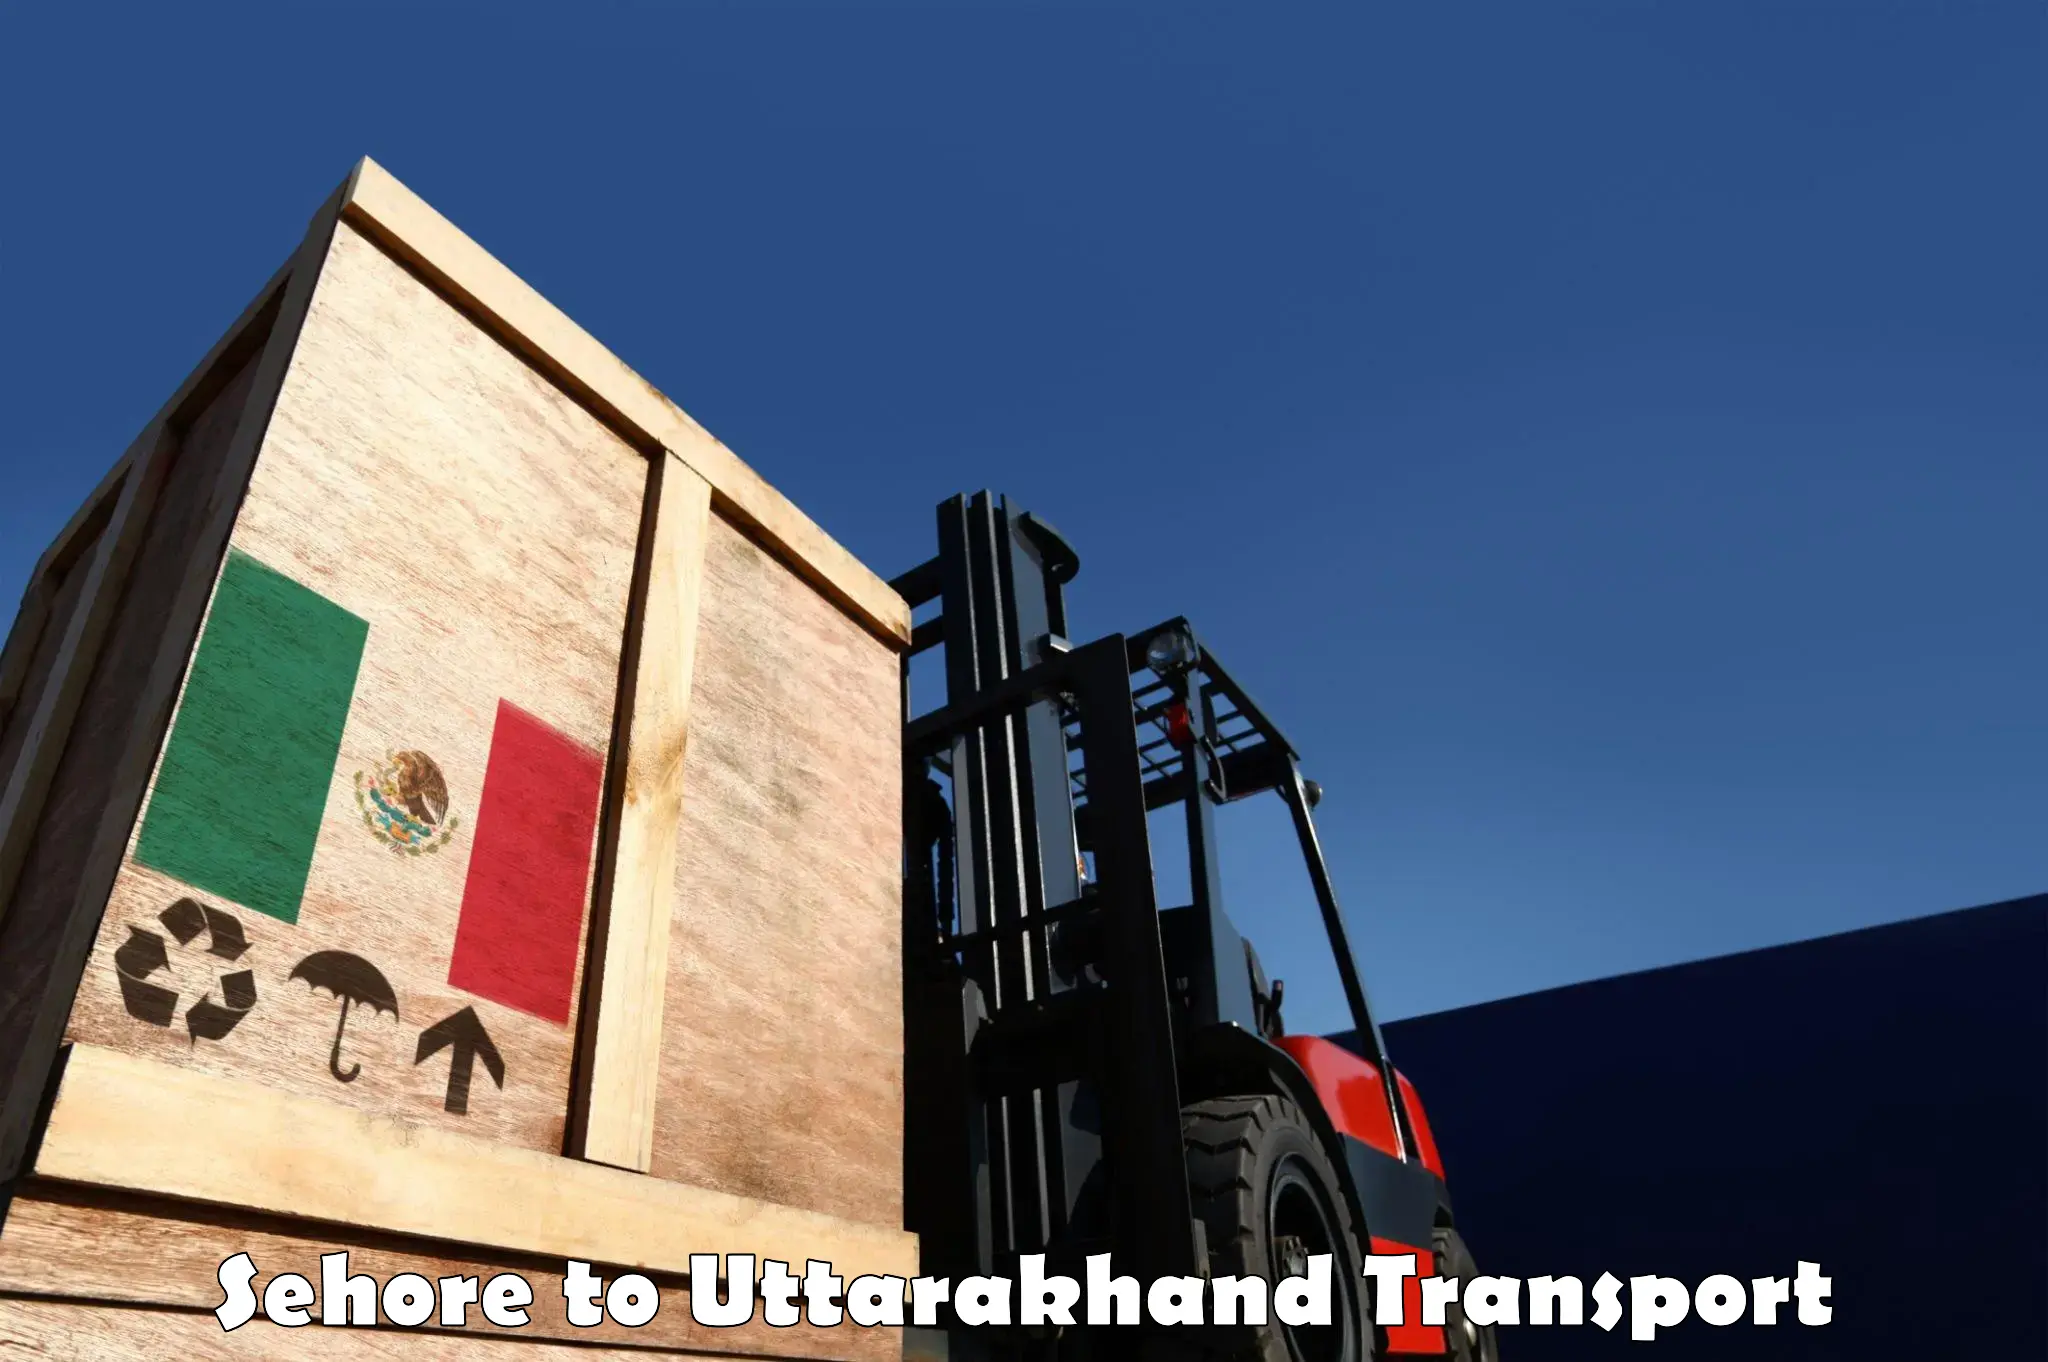 Truck transport companies in India Sehore to Dwarahat